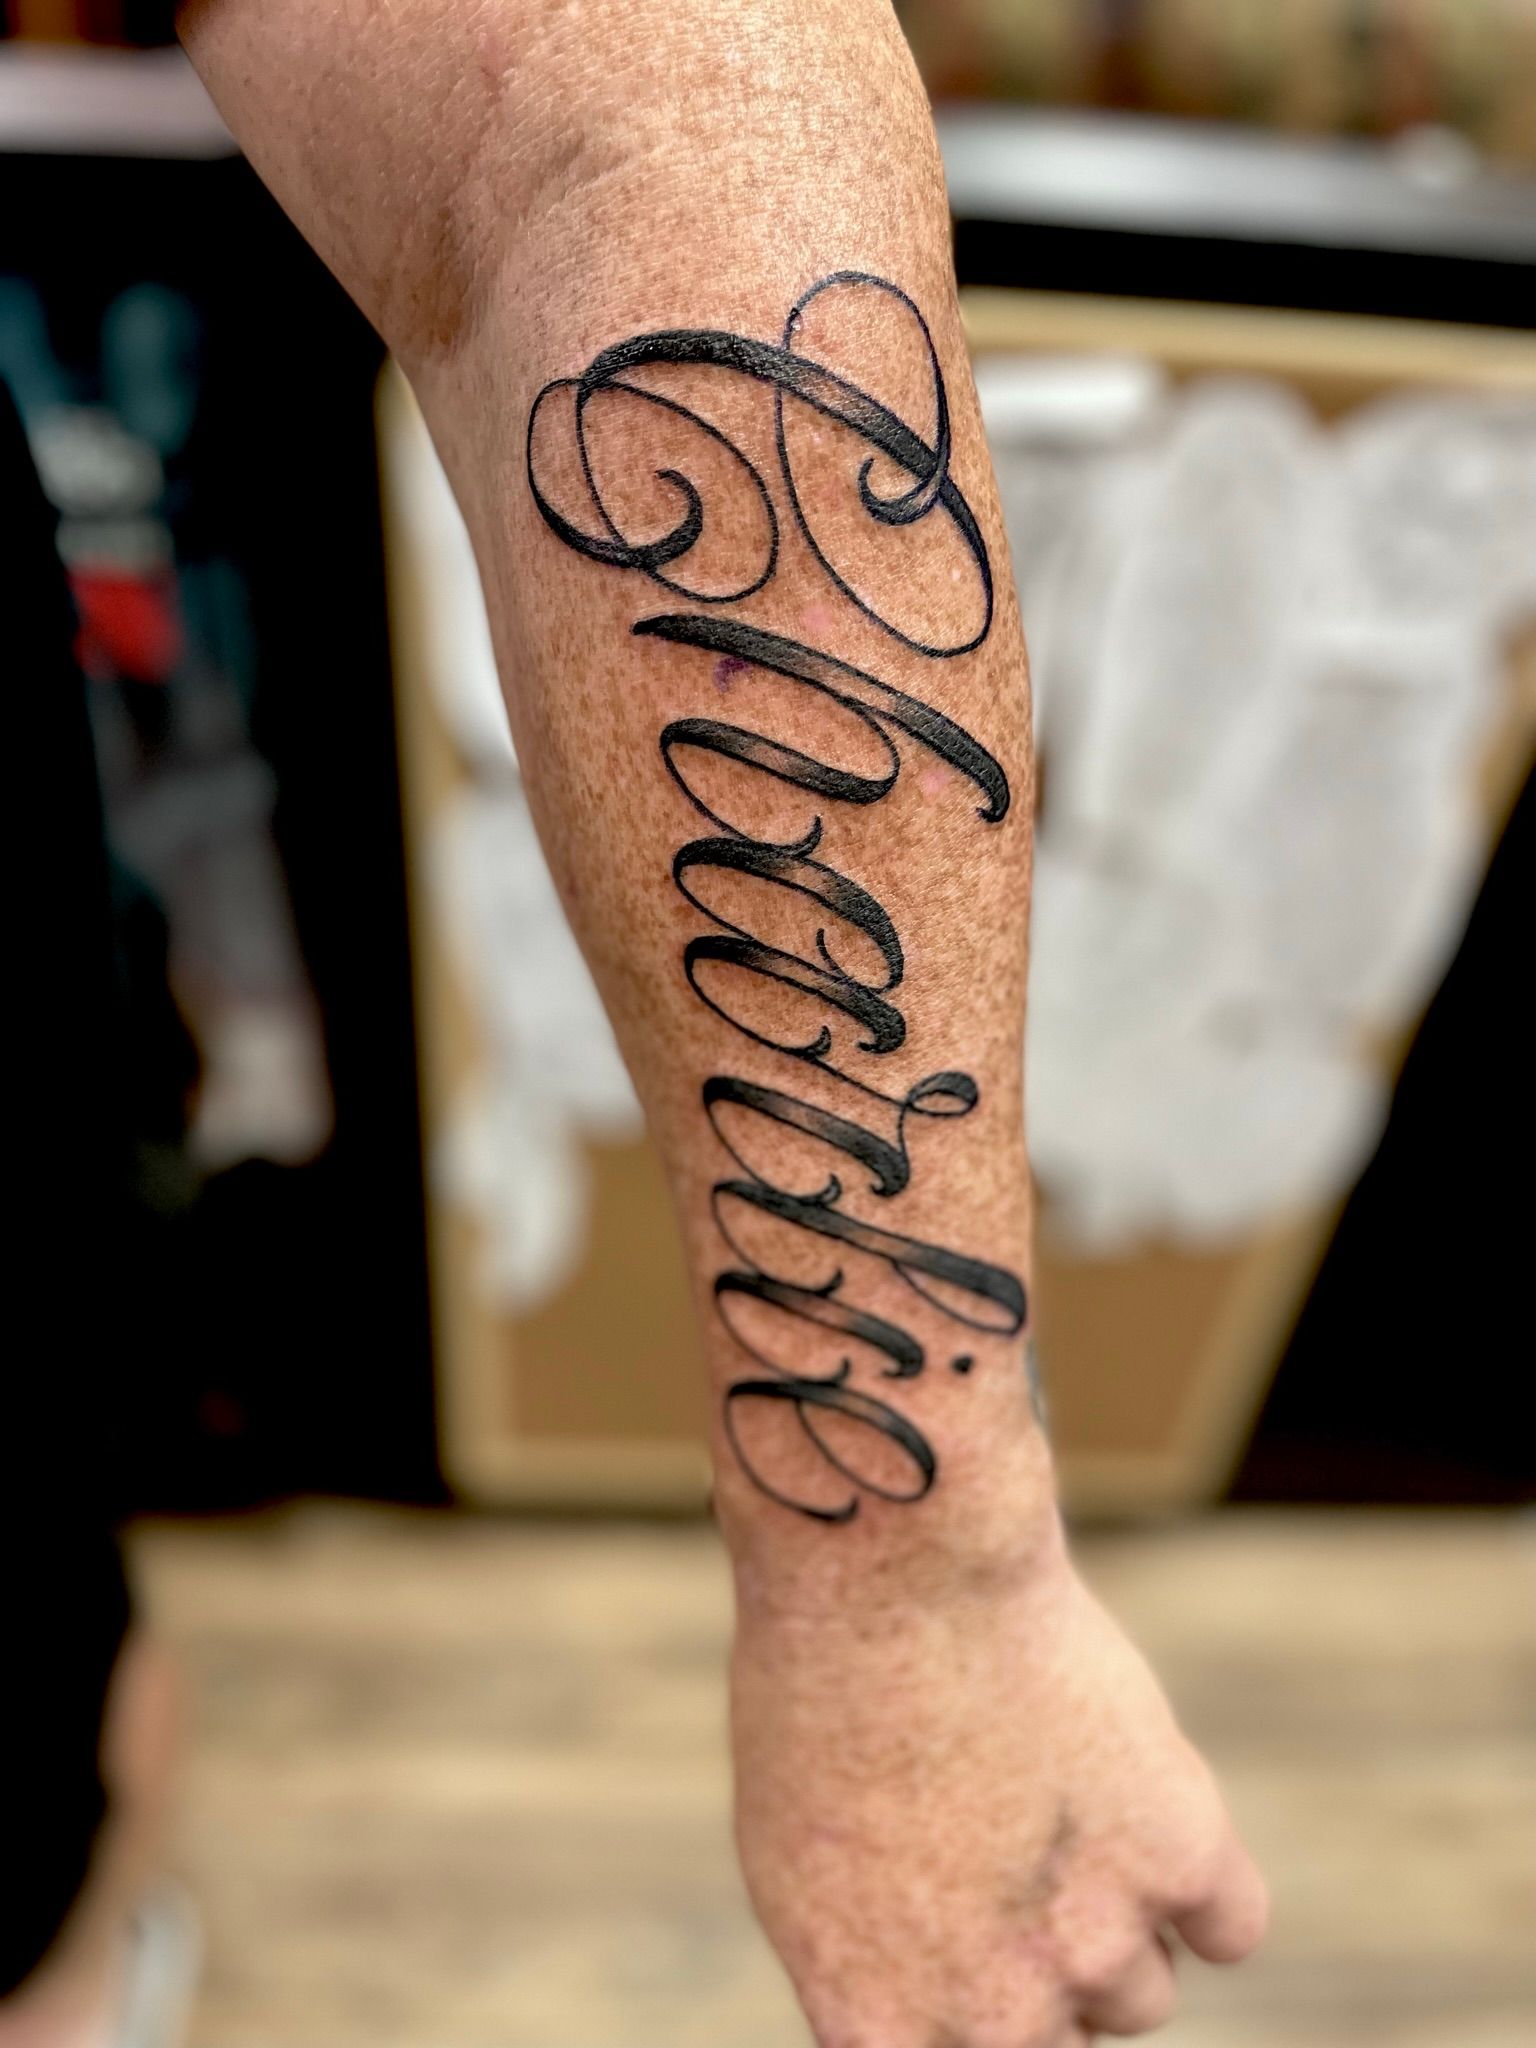 Lettering Tattoos in Miami  Check Out Our Script Tattoo Designs  Script  Tattoos Miami  Fame Tattoos